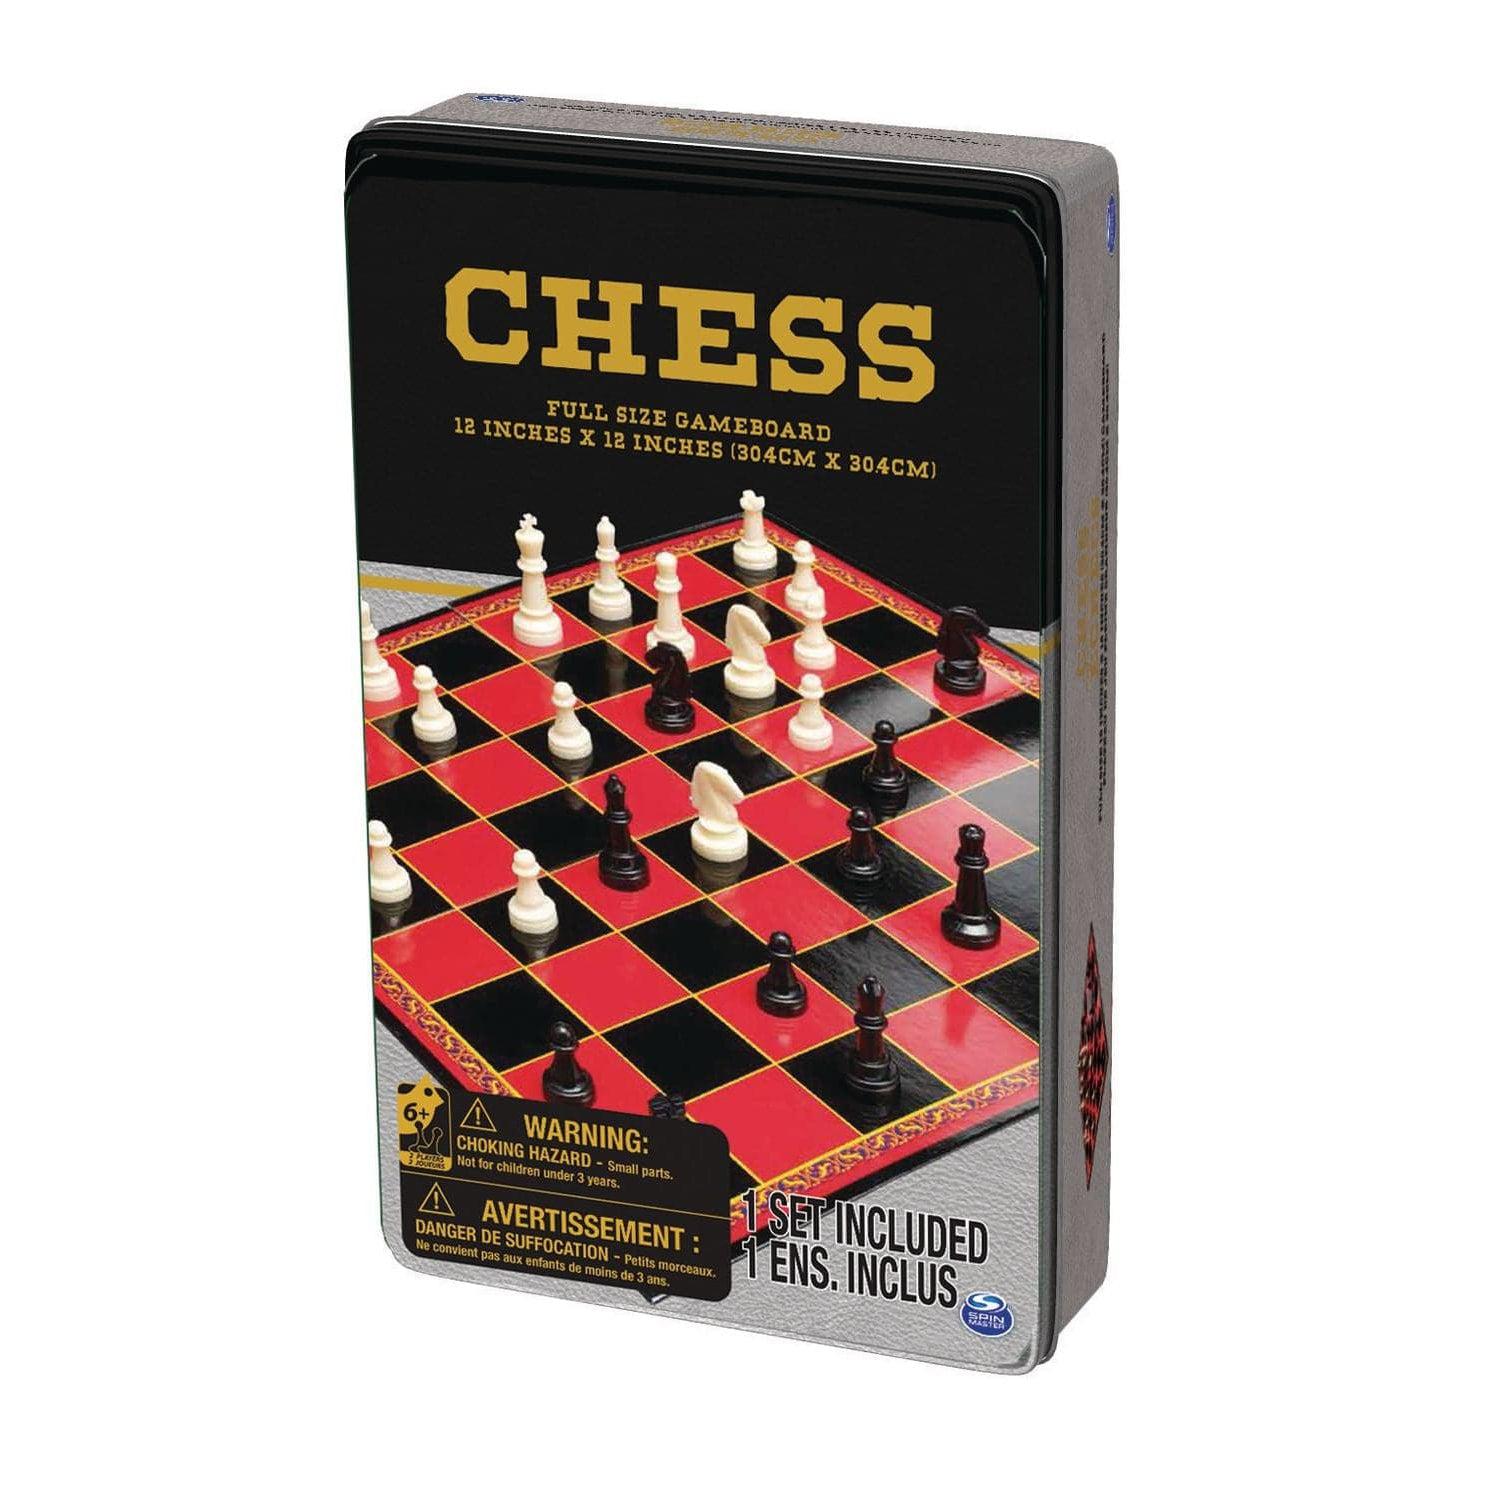 Chess Teacher Board Game, Learning Educational Toys for Adults, Families  and Kids Ages 6 and up, by Spin Master 